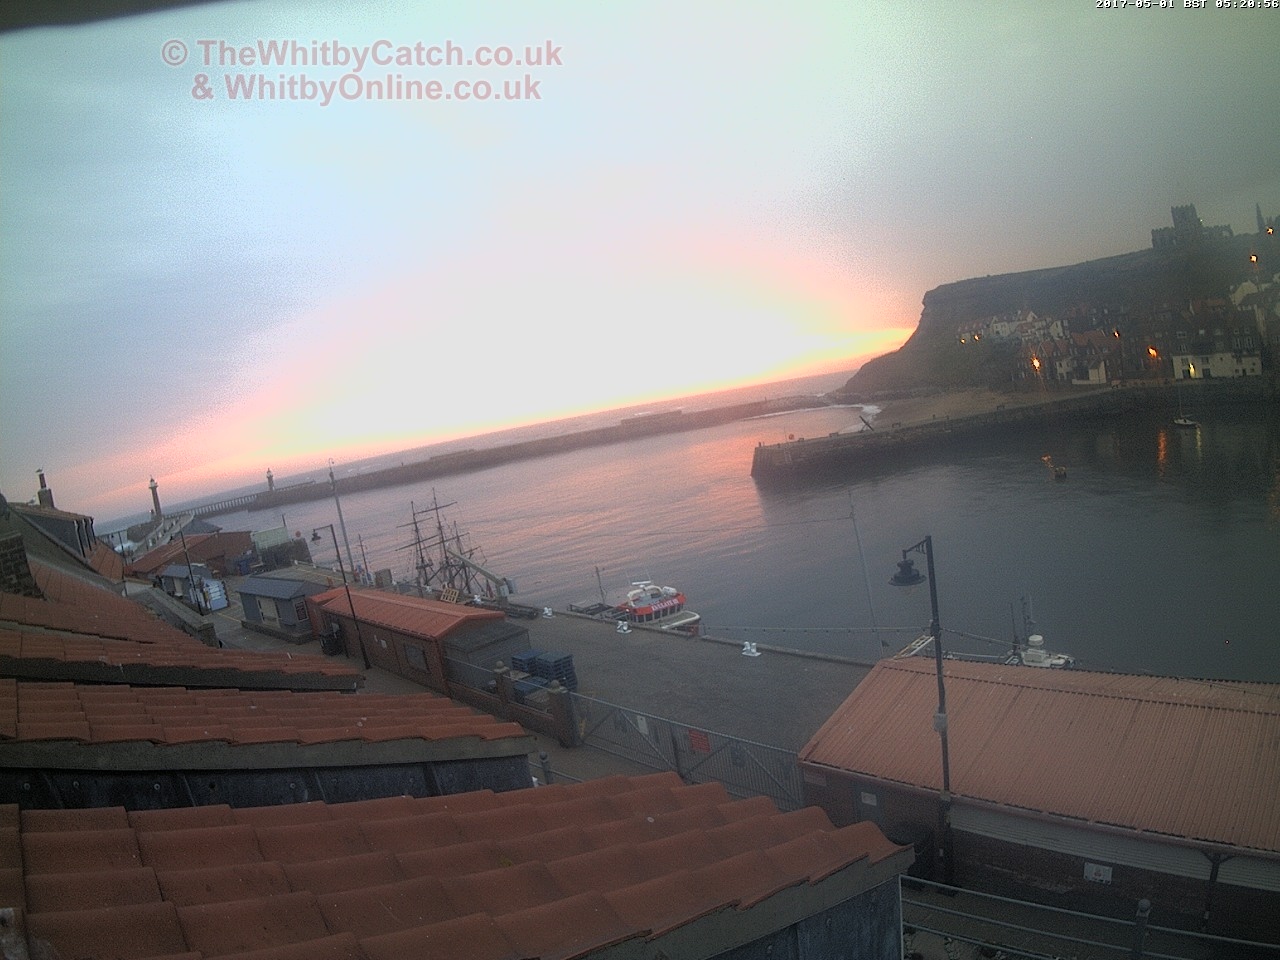 Whitby Mon 1st May 2017 05:21.